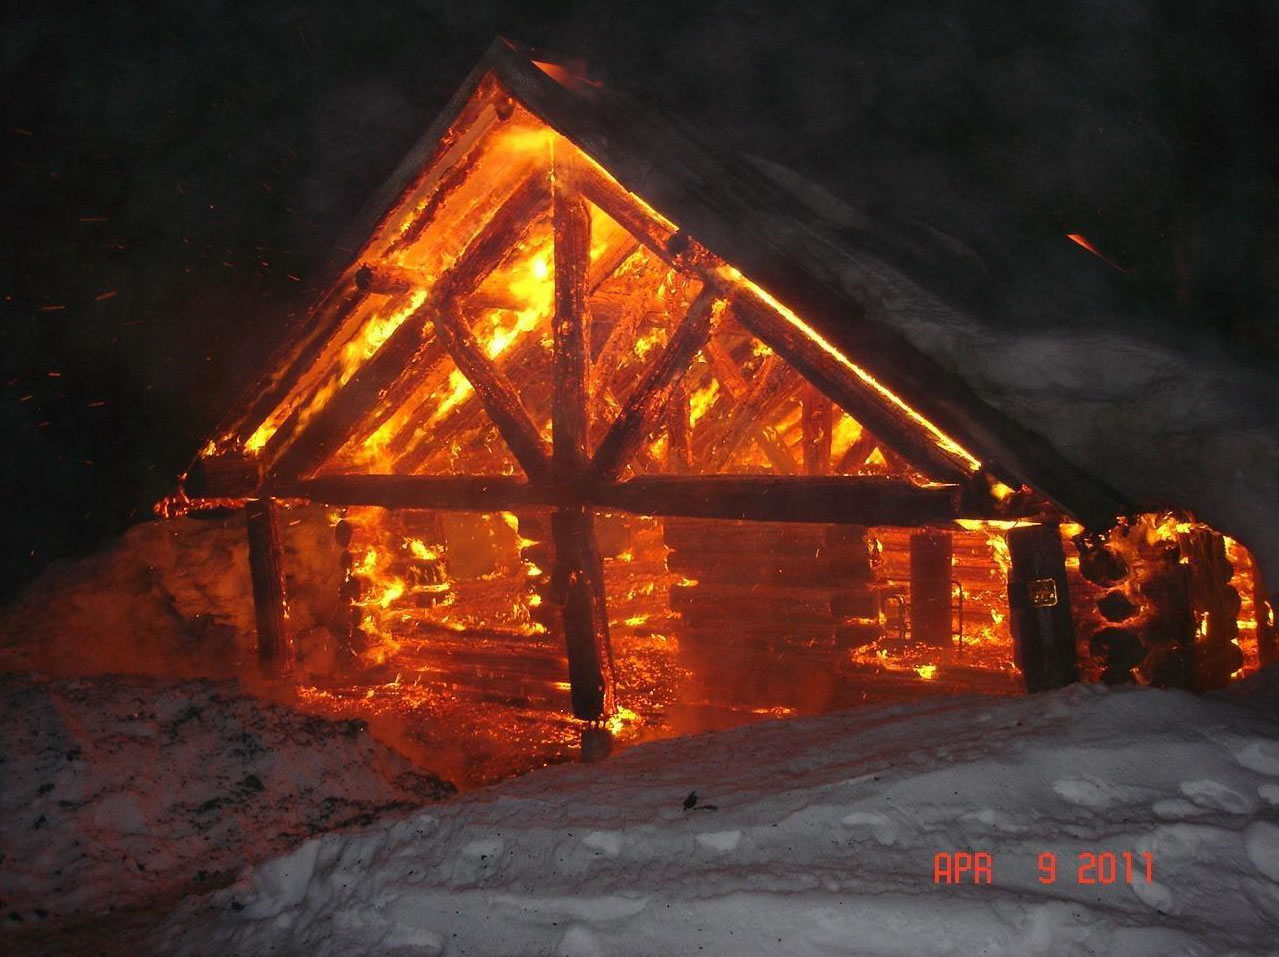 It has more than two years since the warming shelter at Marble Mountain Sno-Park was destroyed by fire.